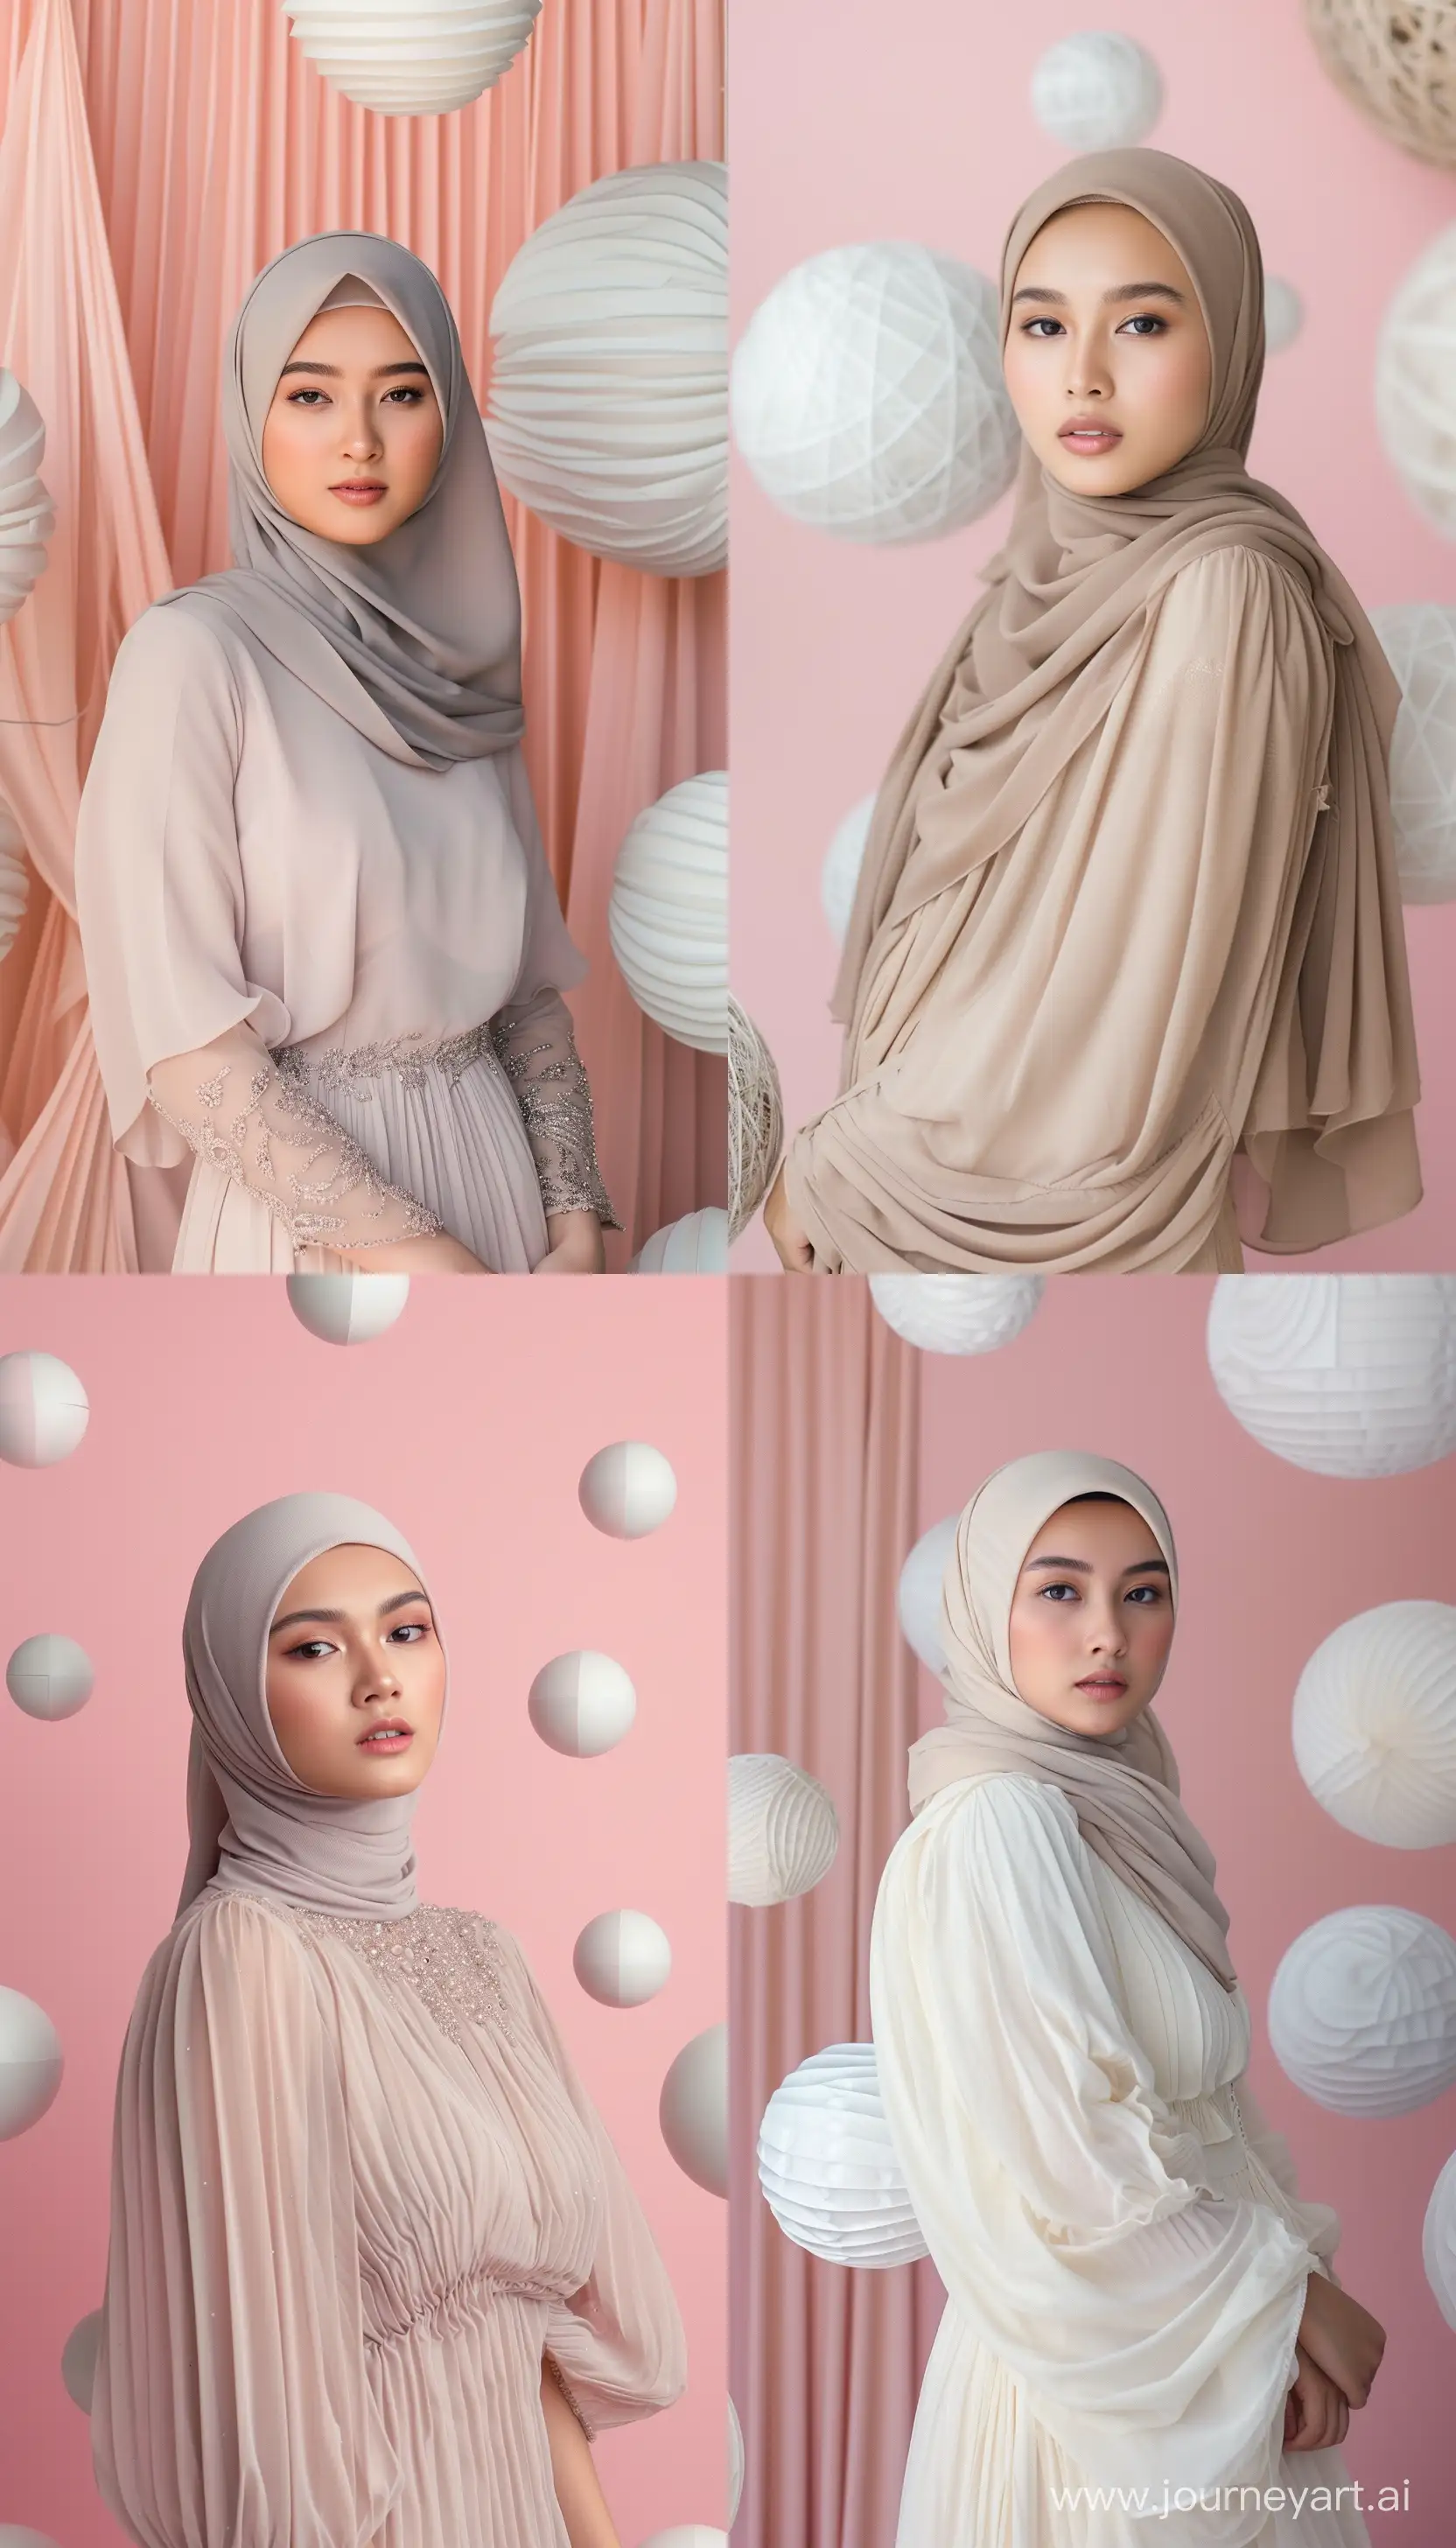 Graceful-Indonesian-Woman-in-Elegant-Hijab-Dress-Amidst-Divided-Spheres